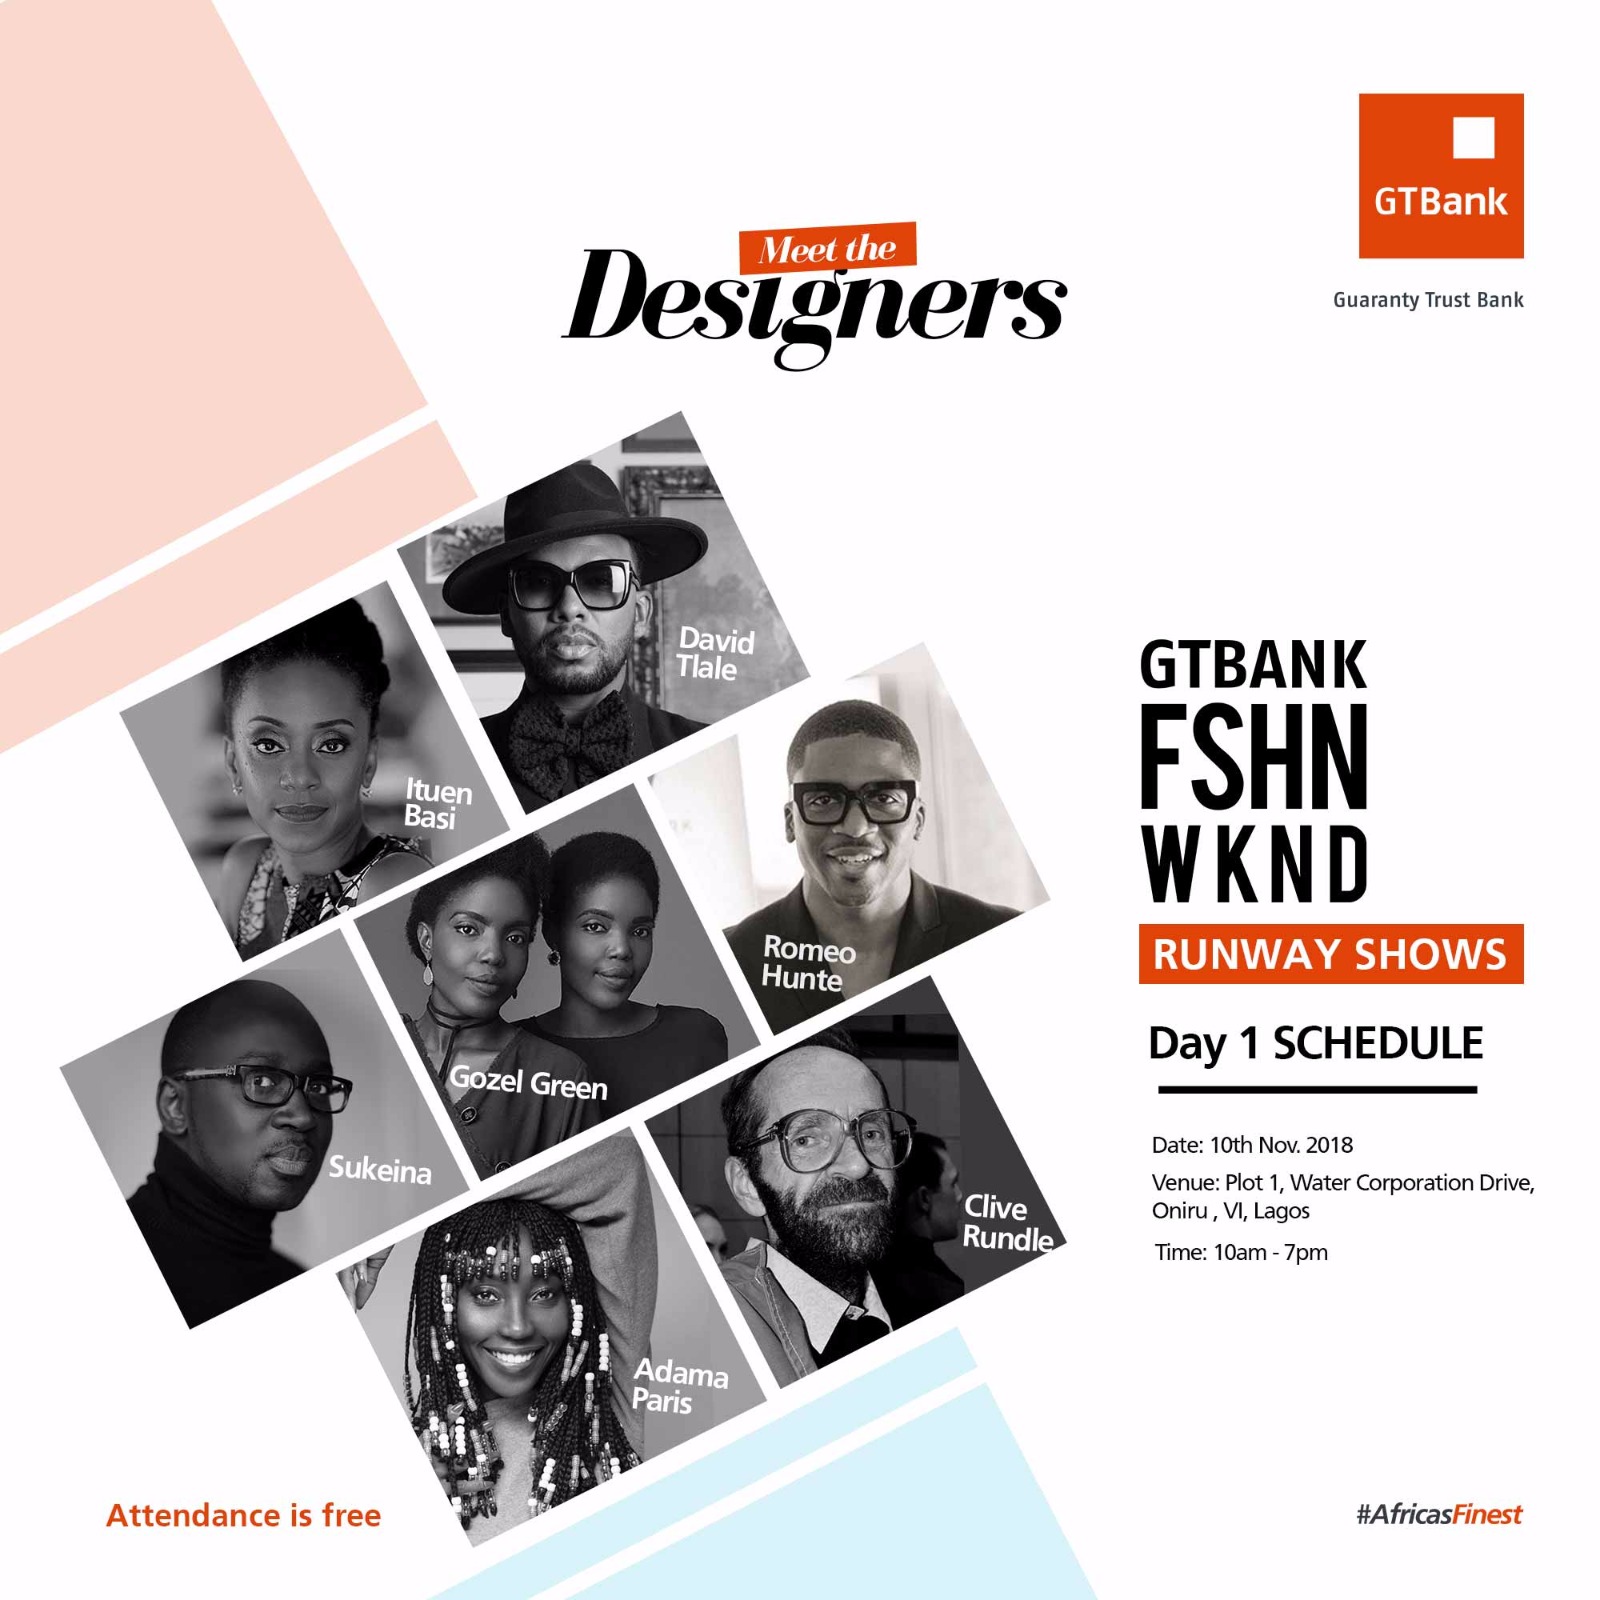 Meet the runway designers for day 1 of GTBank Fashion Weekend